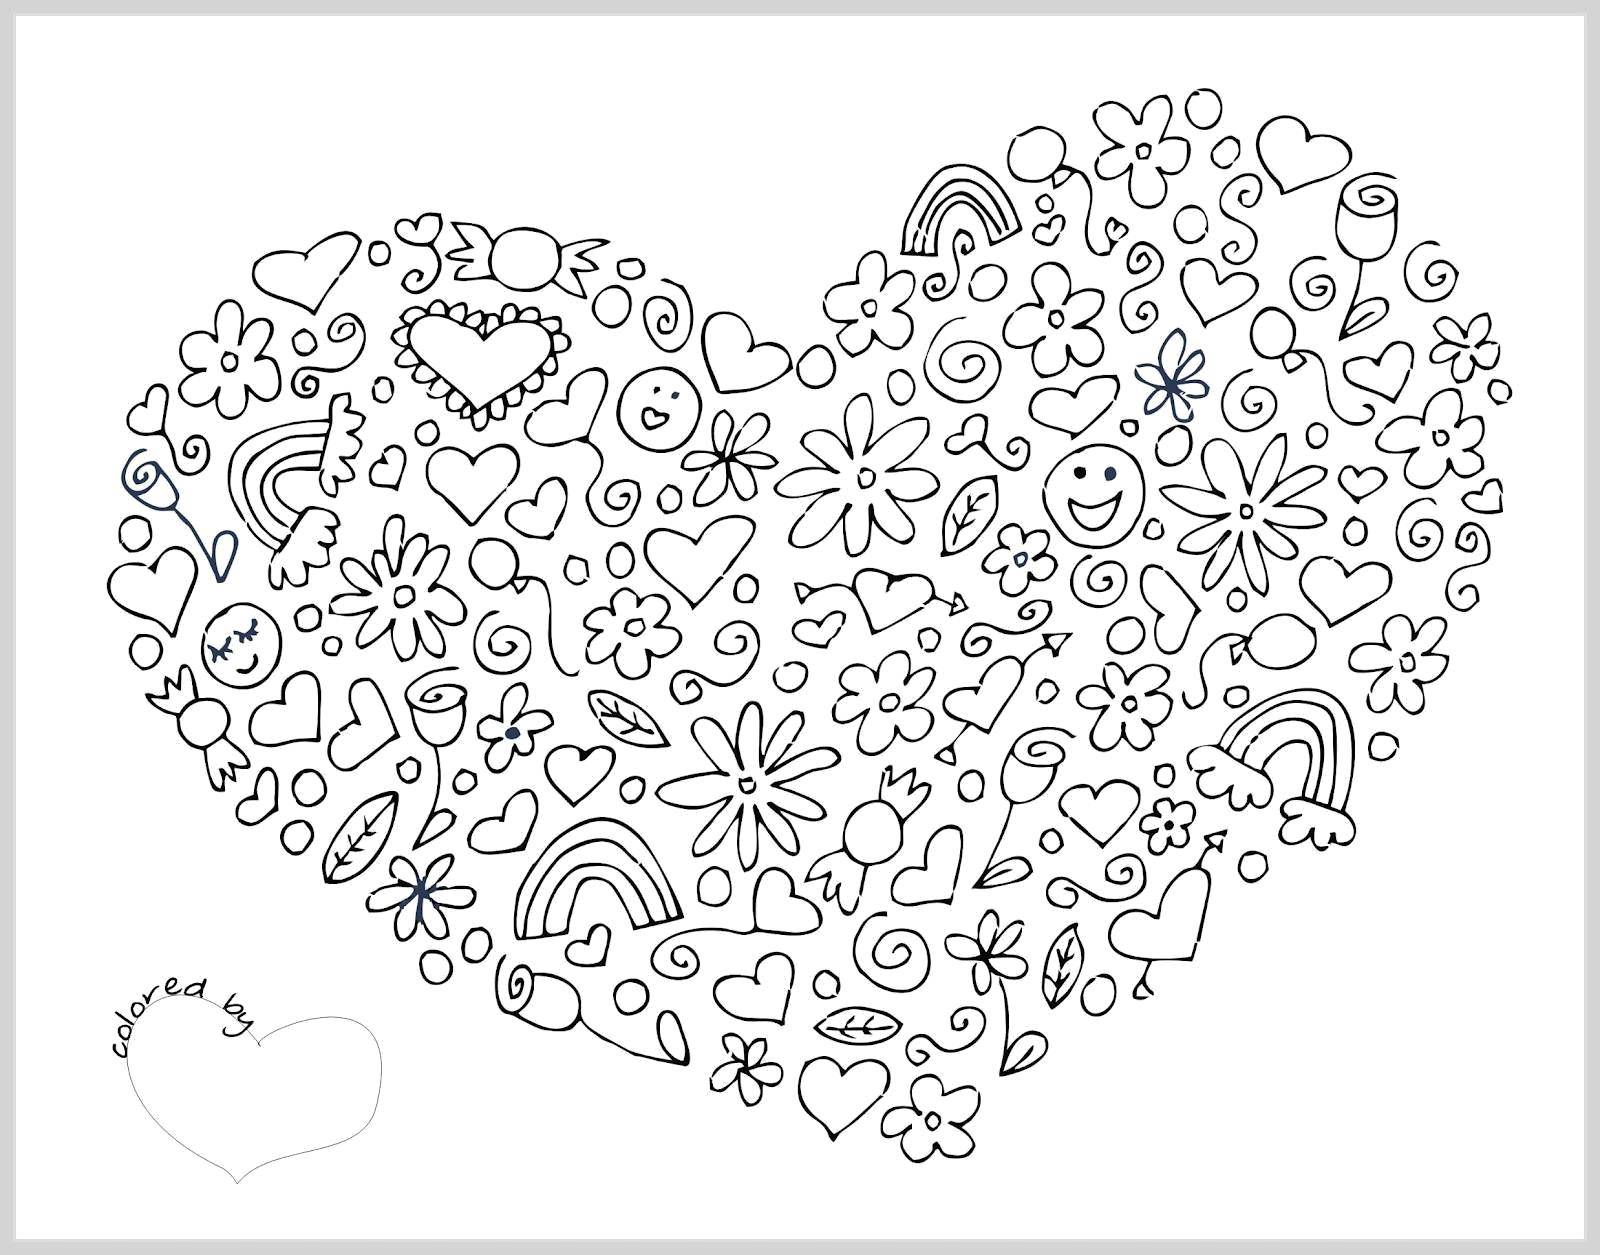 Coloring Fun heart. Category Hearts. Tags:  Heart, love.